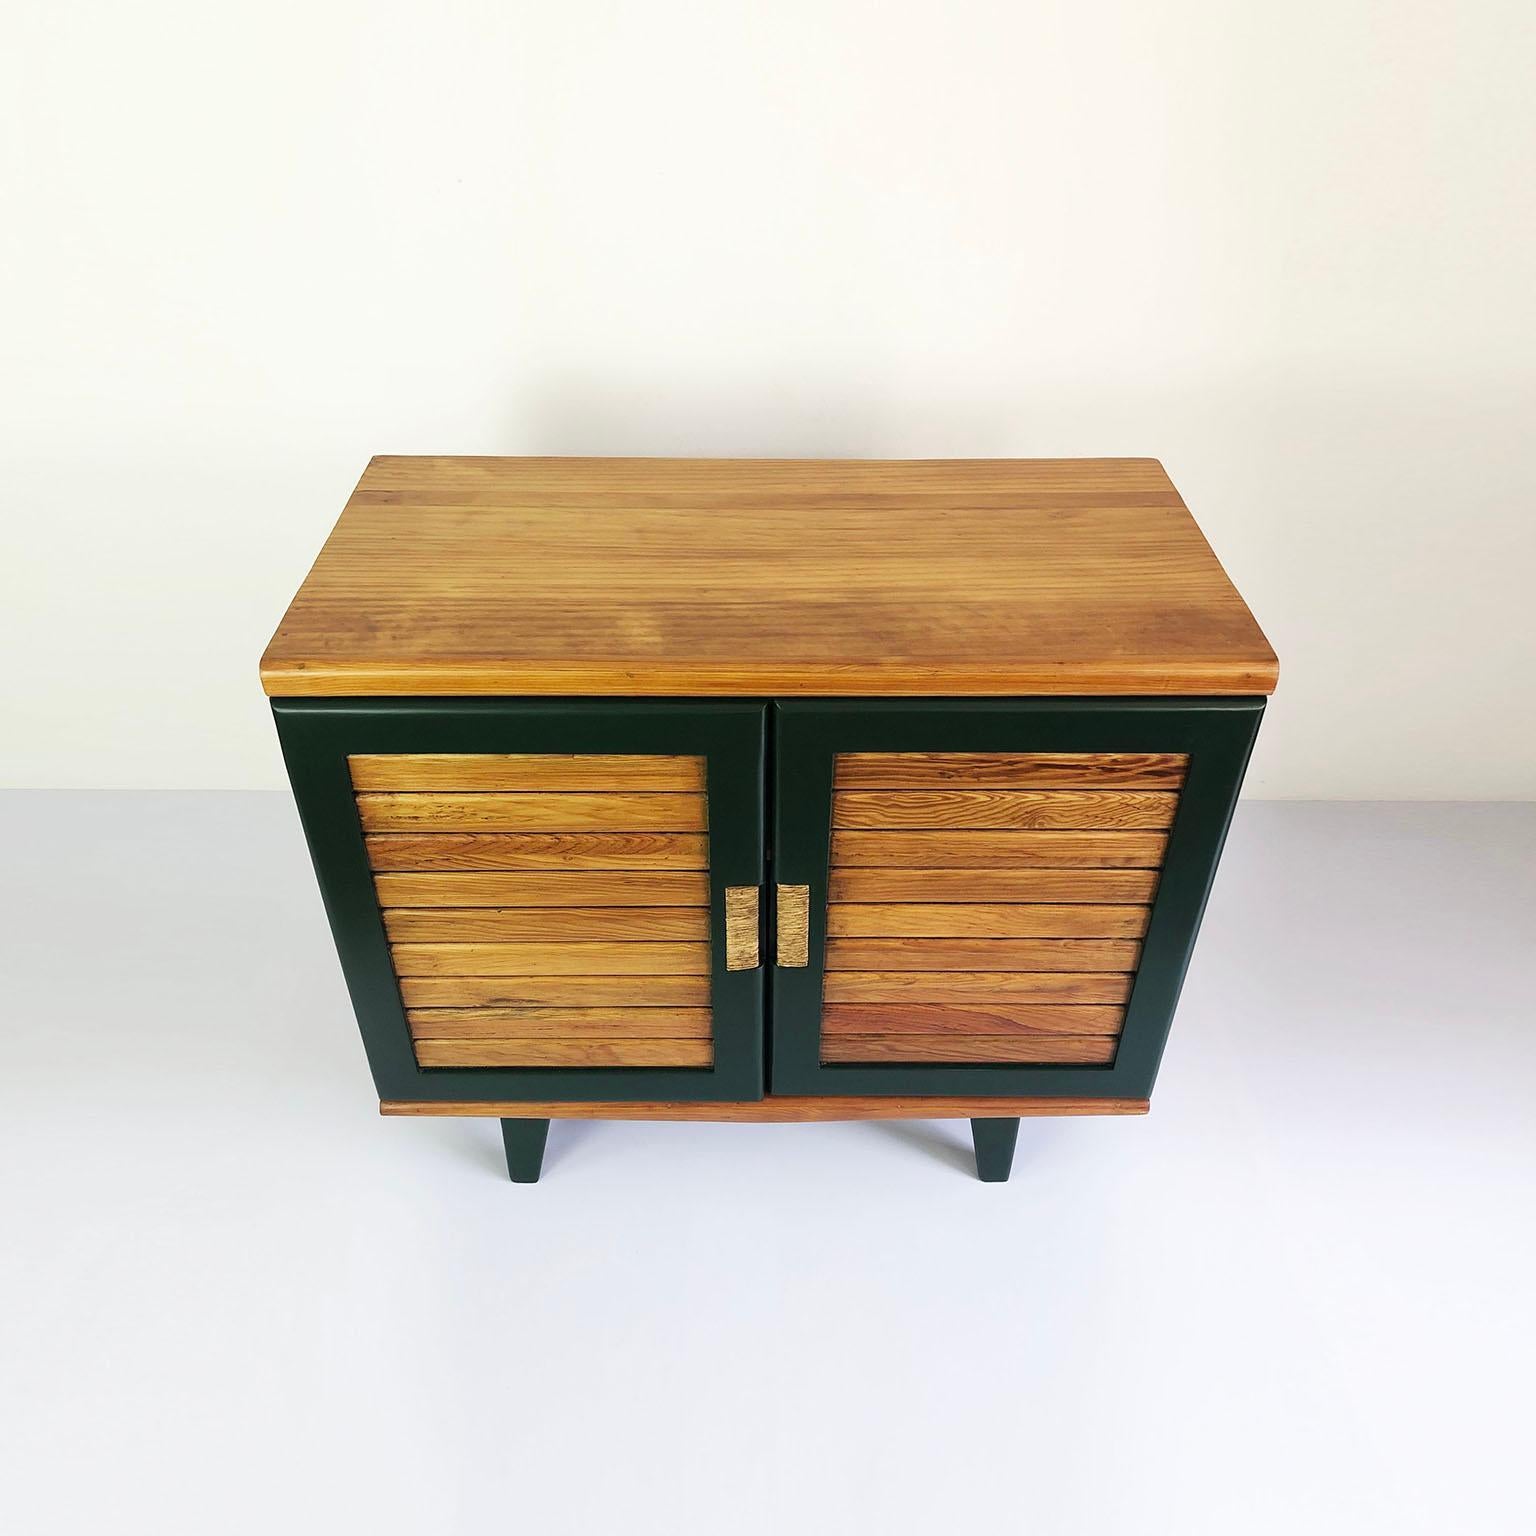 We offer this rare original Domus Credenza by Michael Van Beuren in pine wood and with the characteristic green Van Beuren color, designed by the American Bauhaus designer, Michael Van Beuren in Mexico, circa 1950, this handmade, solid pine and was